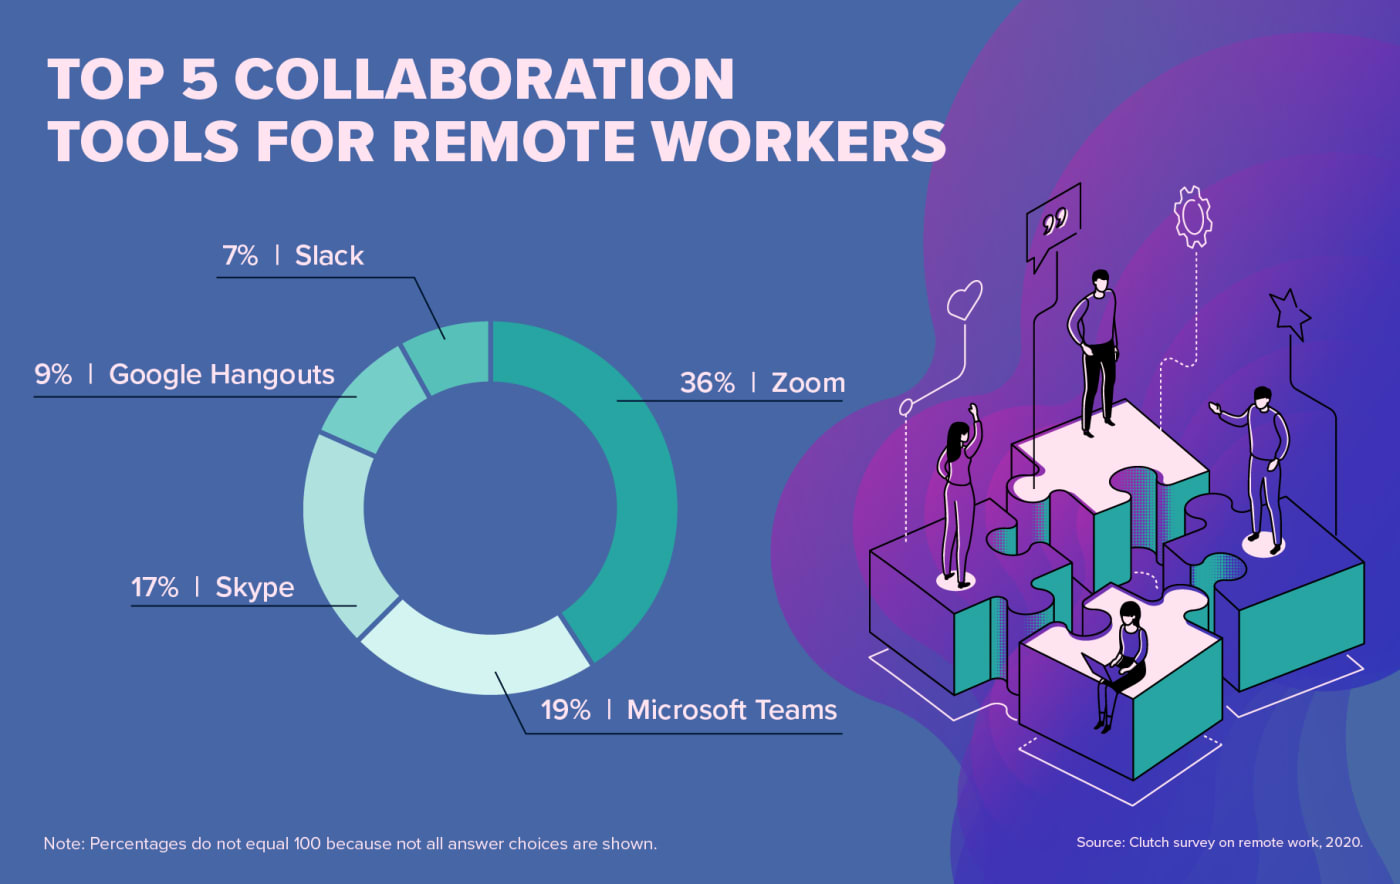 Top 5 Collaboration Tools for Remote Workers